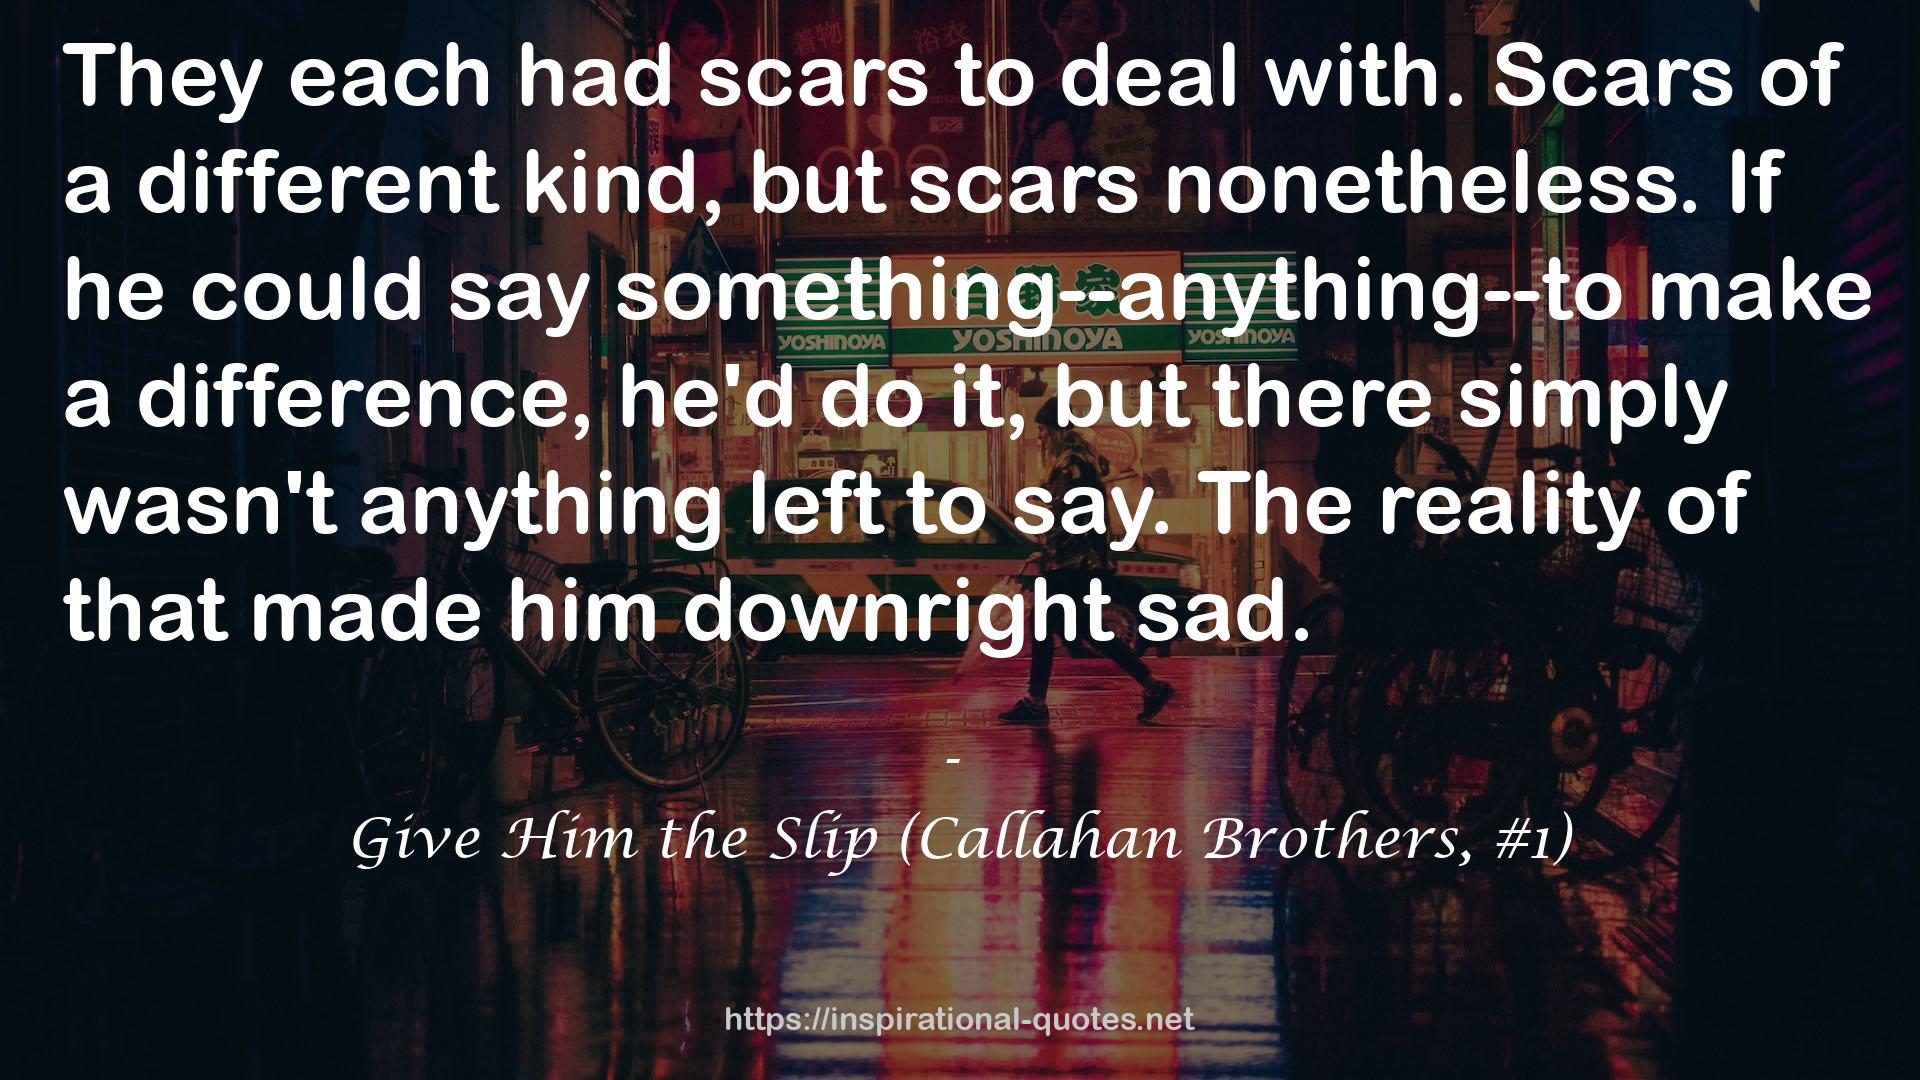 Give Him the Slip (Callahan Brothers, #1) QUOTES